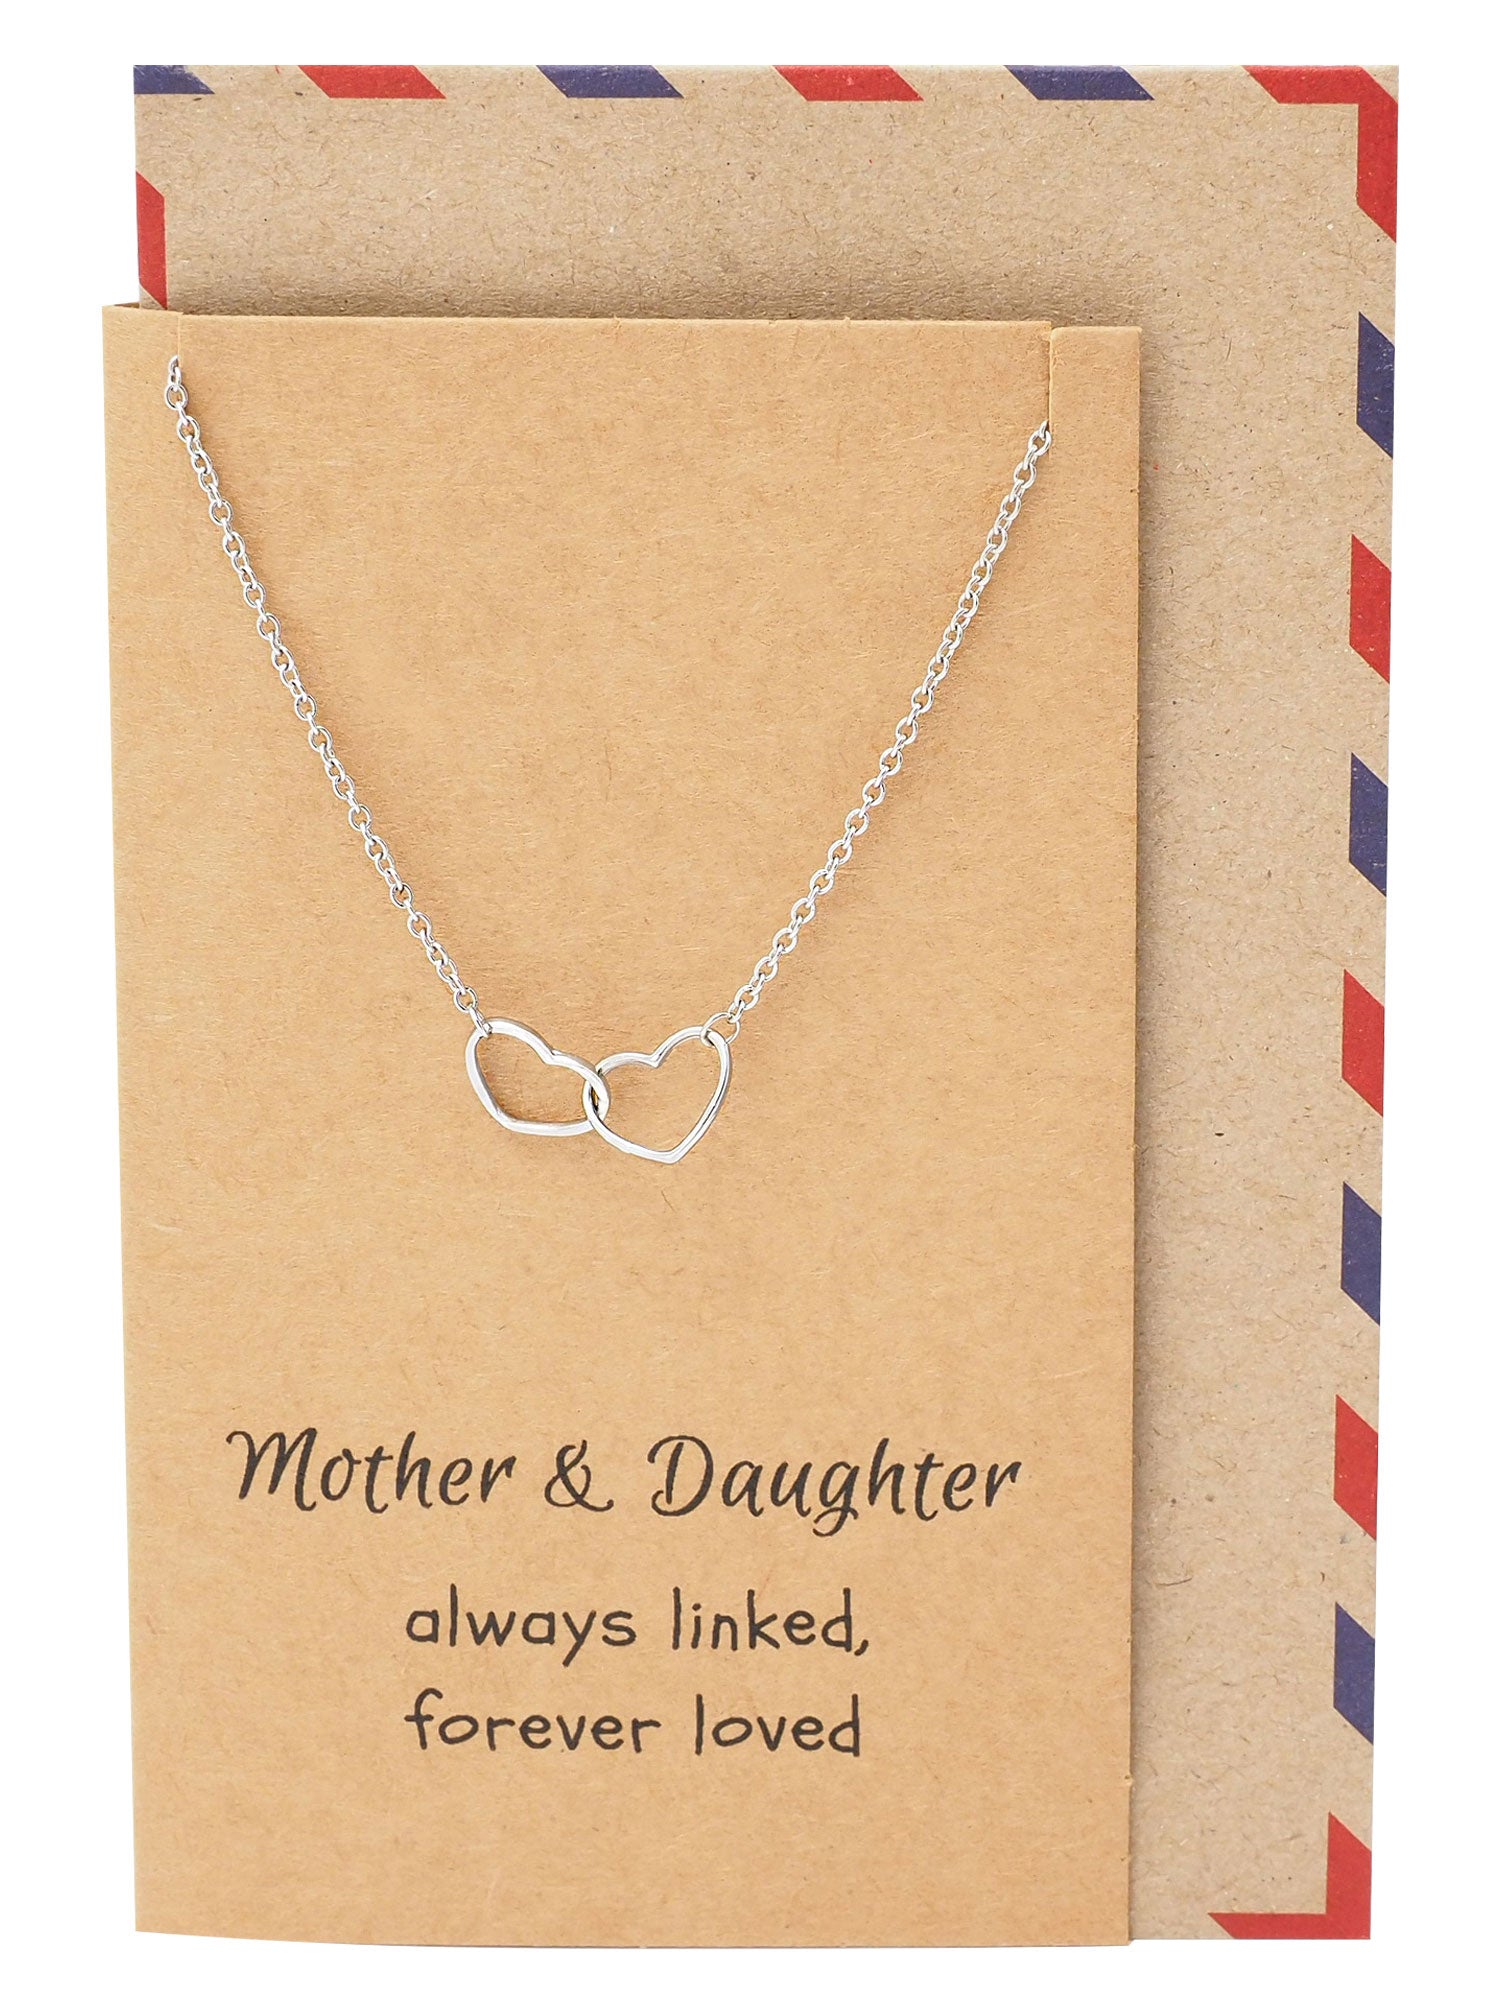 Silver 2pc MOM & DAUGHTER Necklace Set Mother and Daughter Pendant Necklaces  | eBay